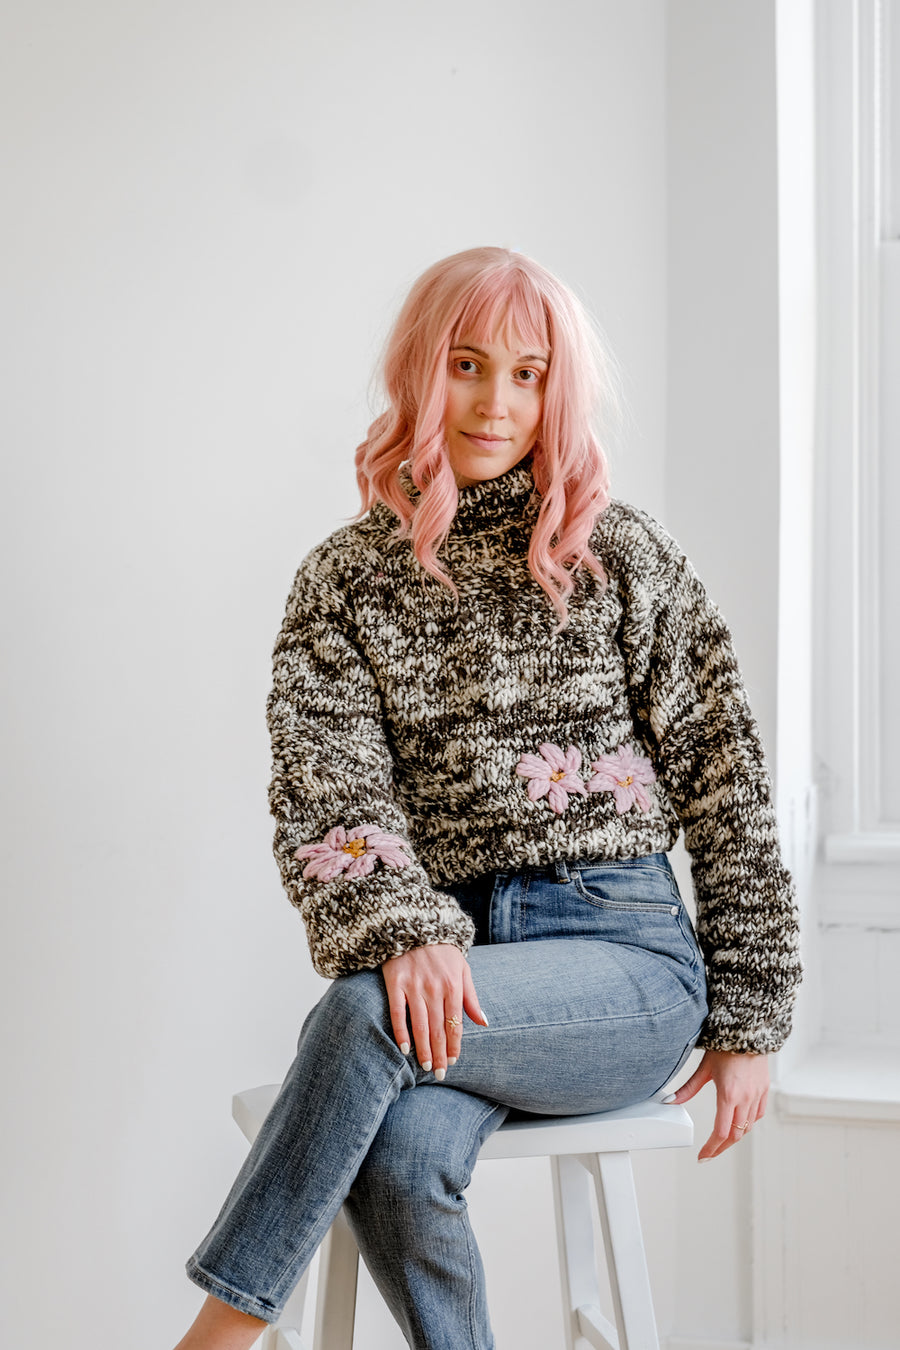 Pepper Floral in Pink 100% Sustainable Sweater - Lex & Lynne